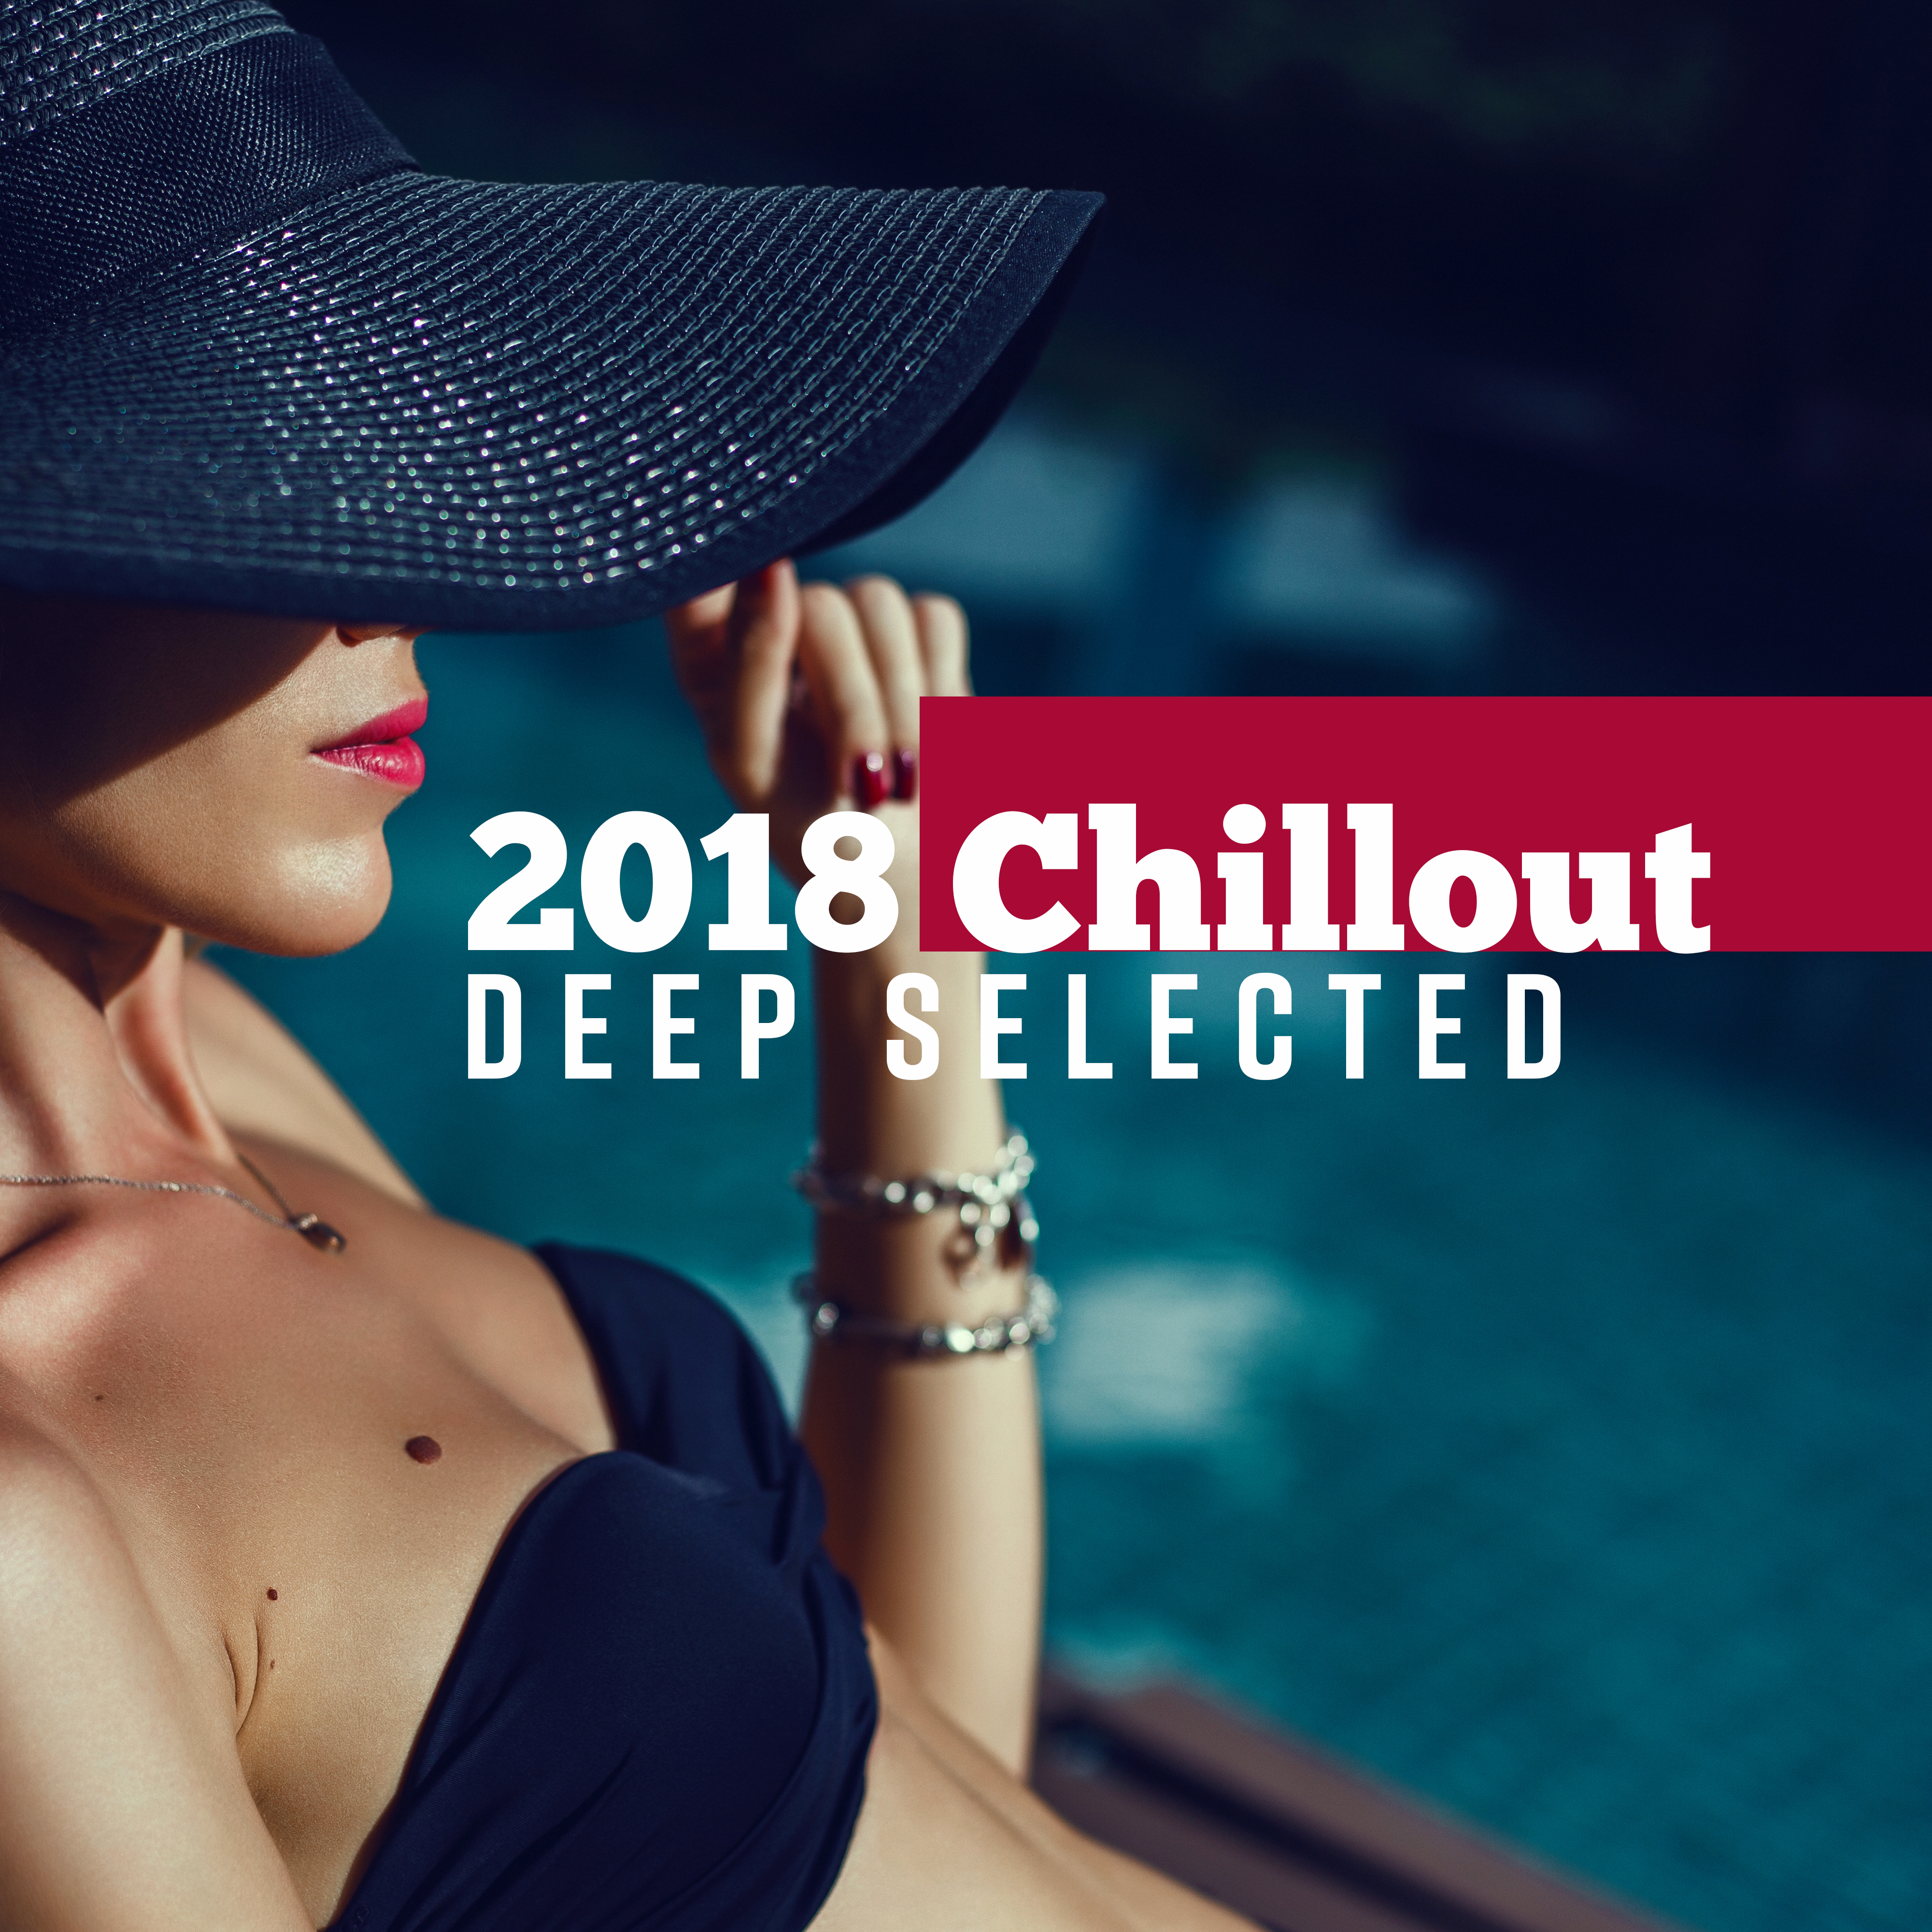 2018 Chillout Deep Selected